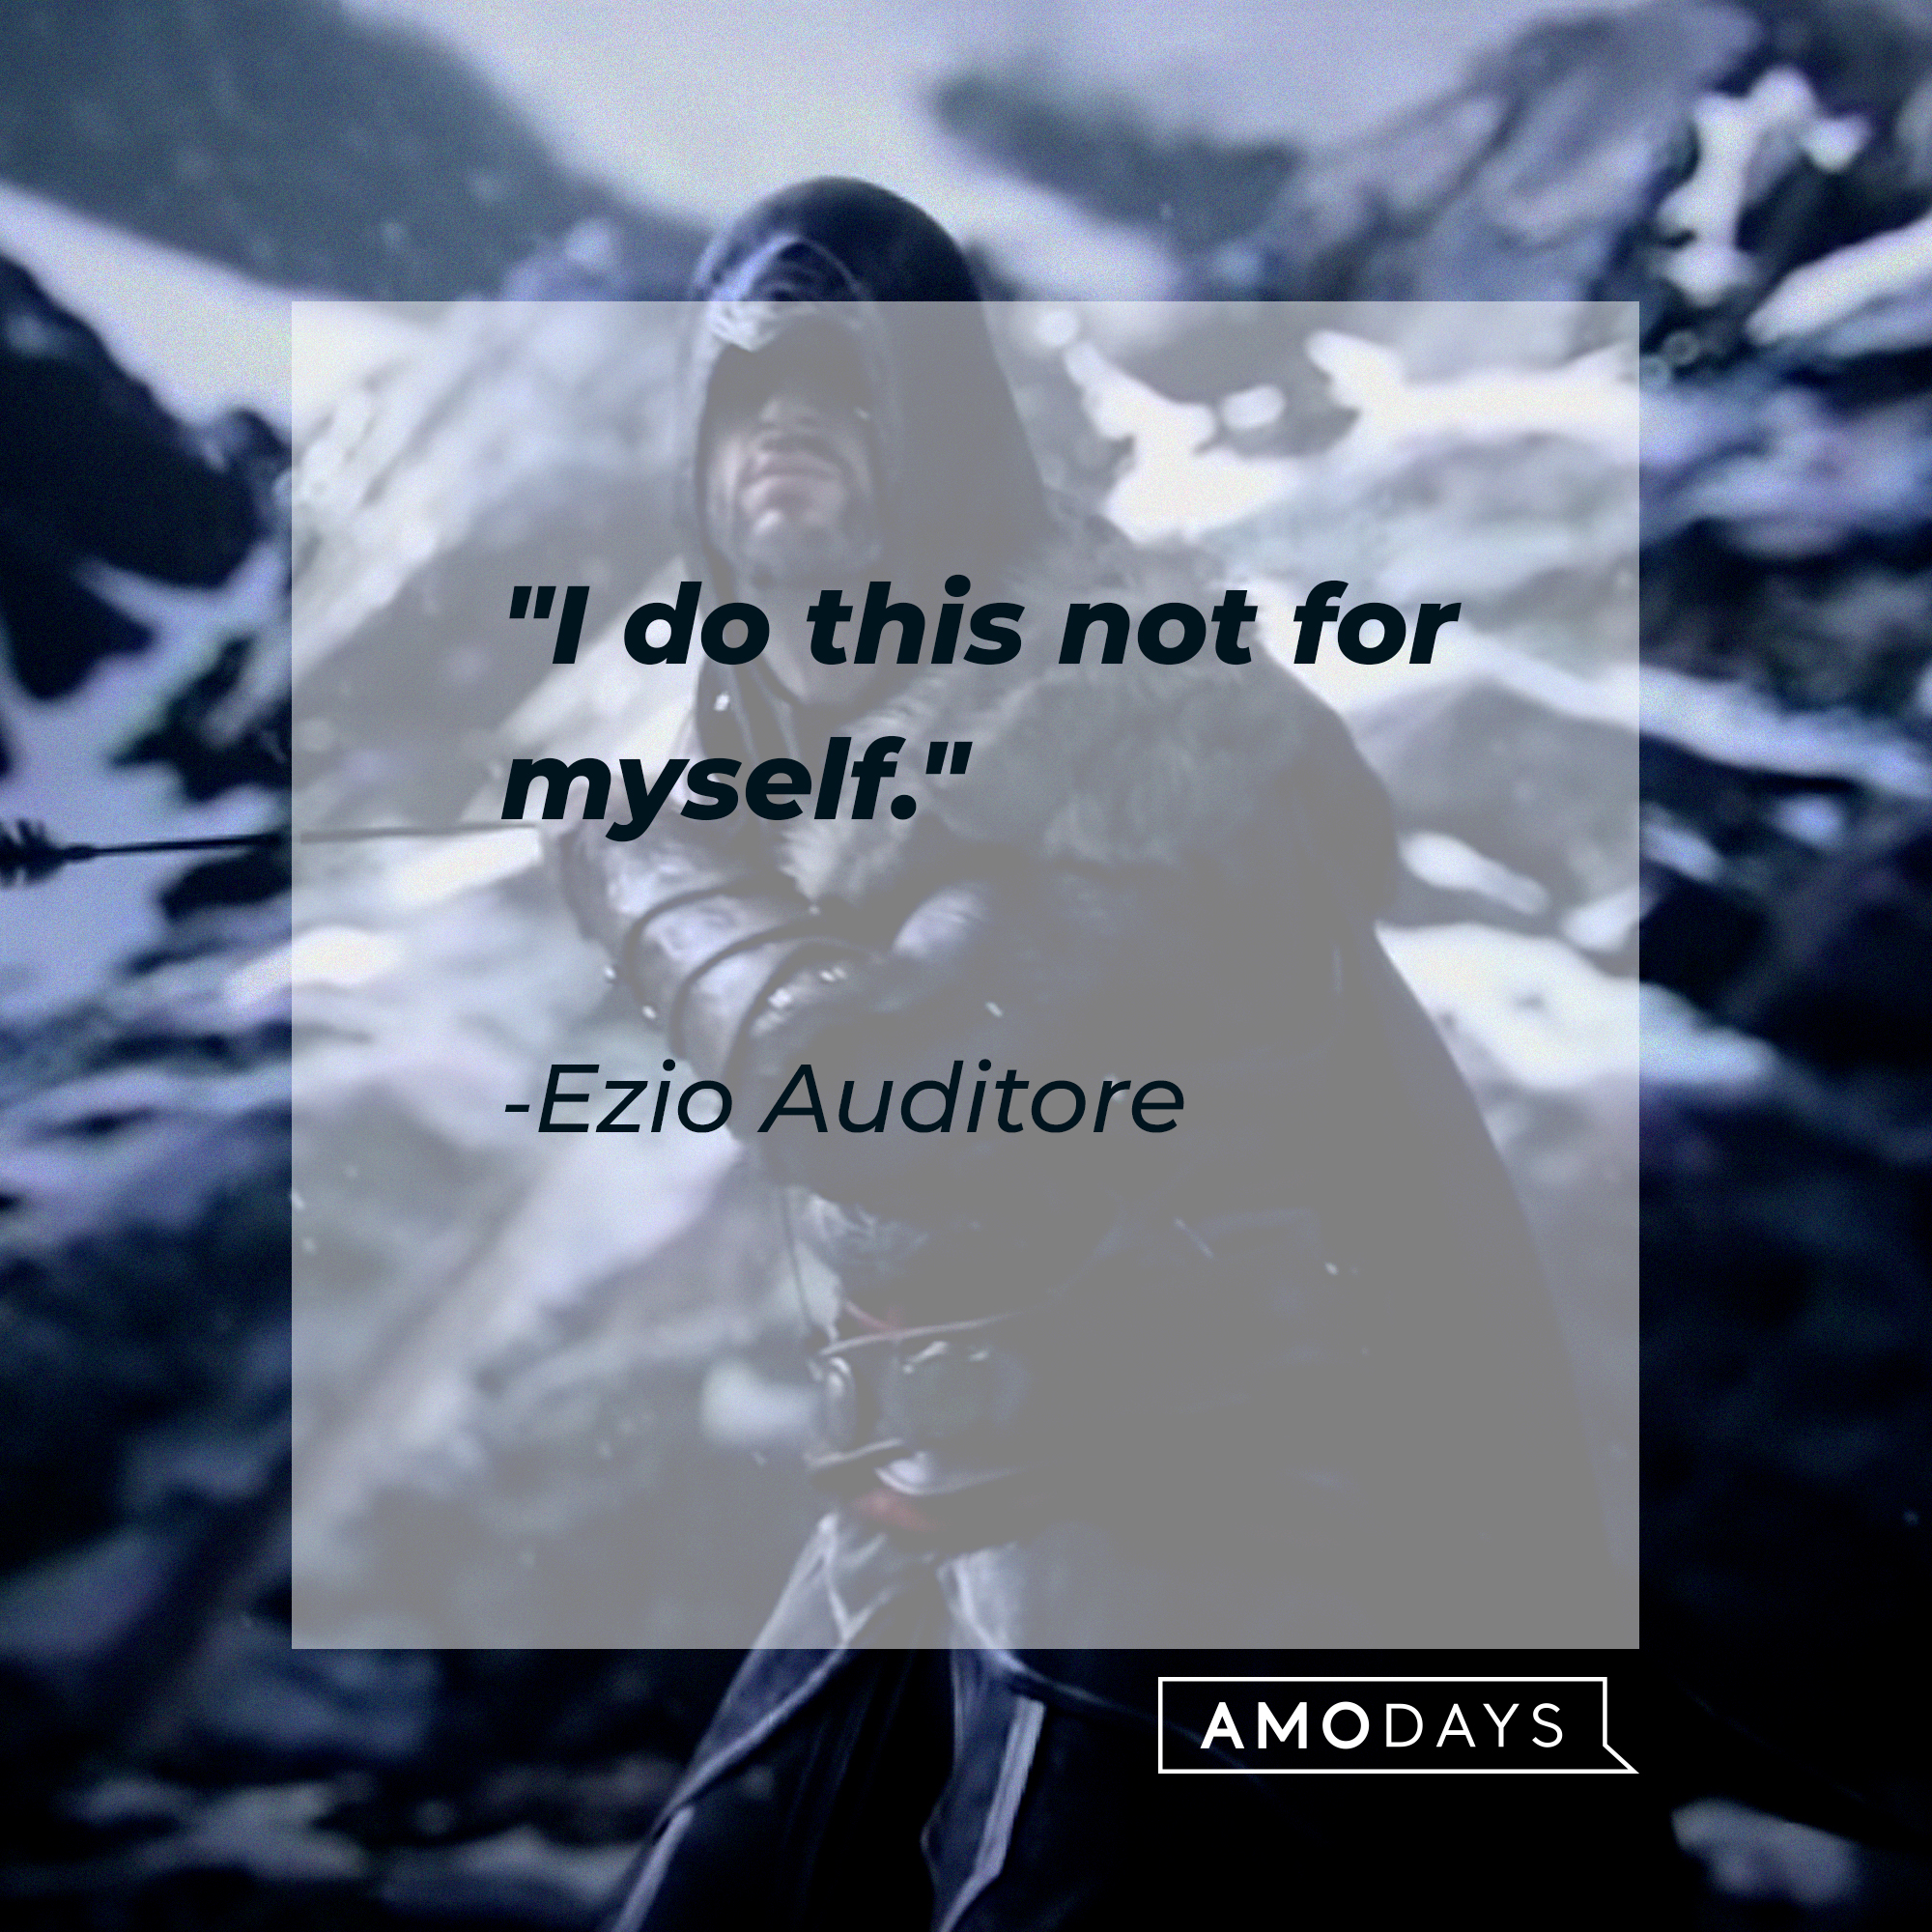 Enzo Auditore's quote: "I do this not for myself." | Source: youtube.com/UbisoftNA